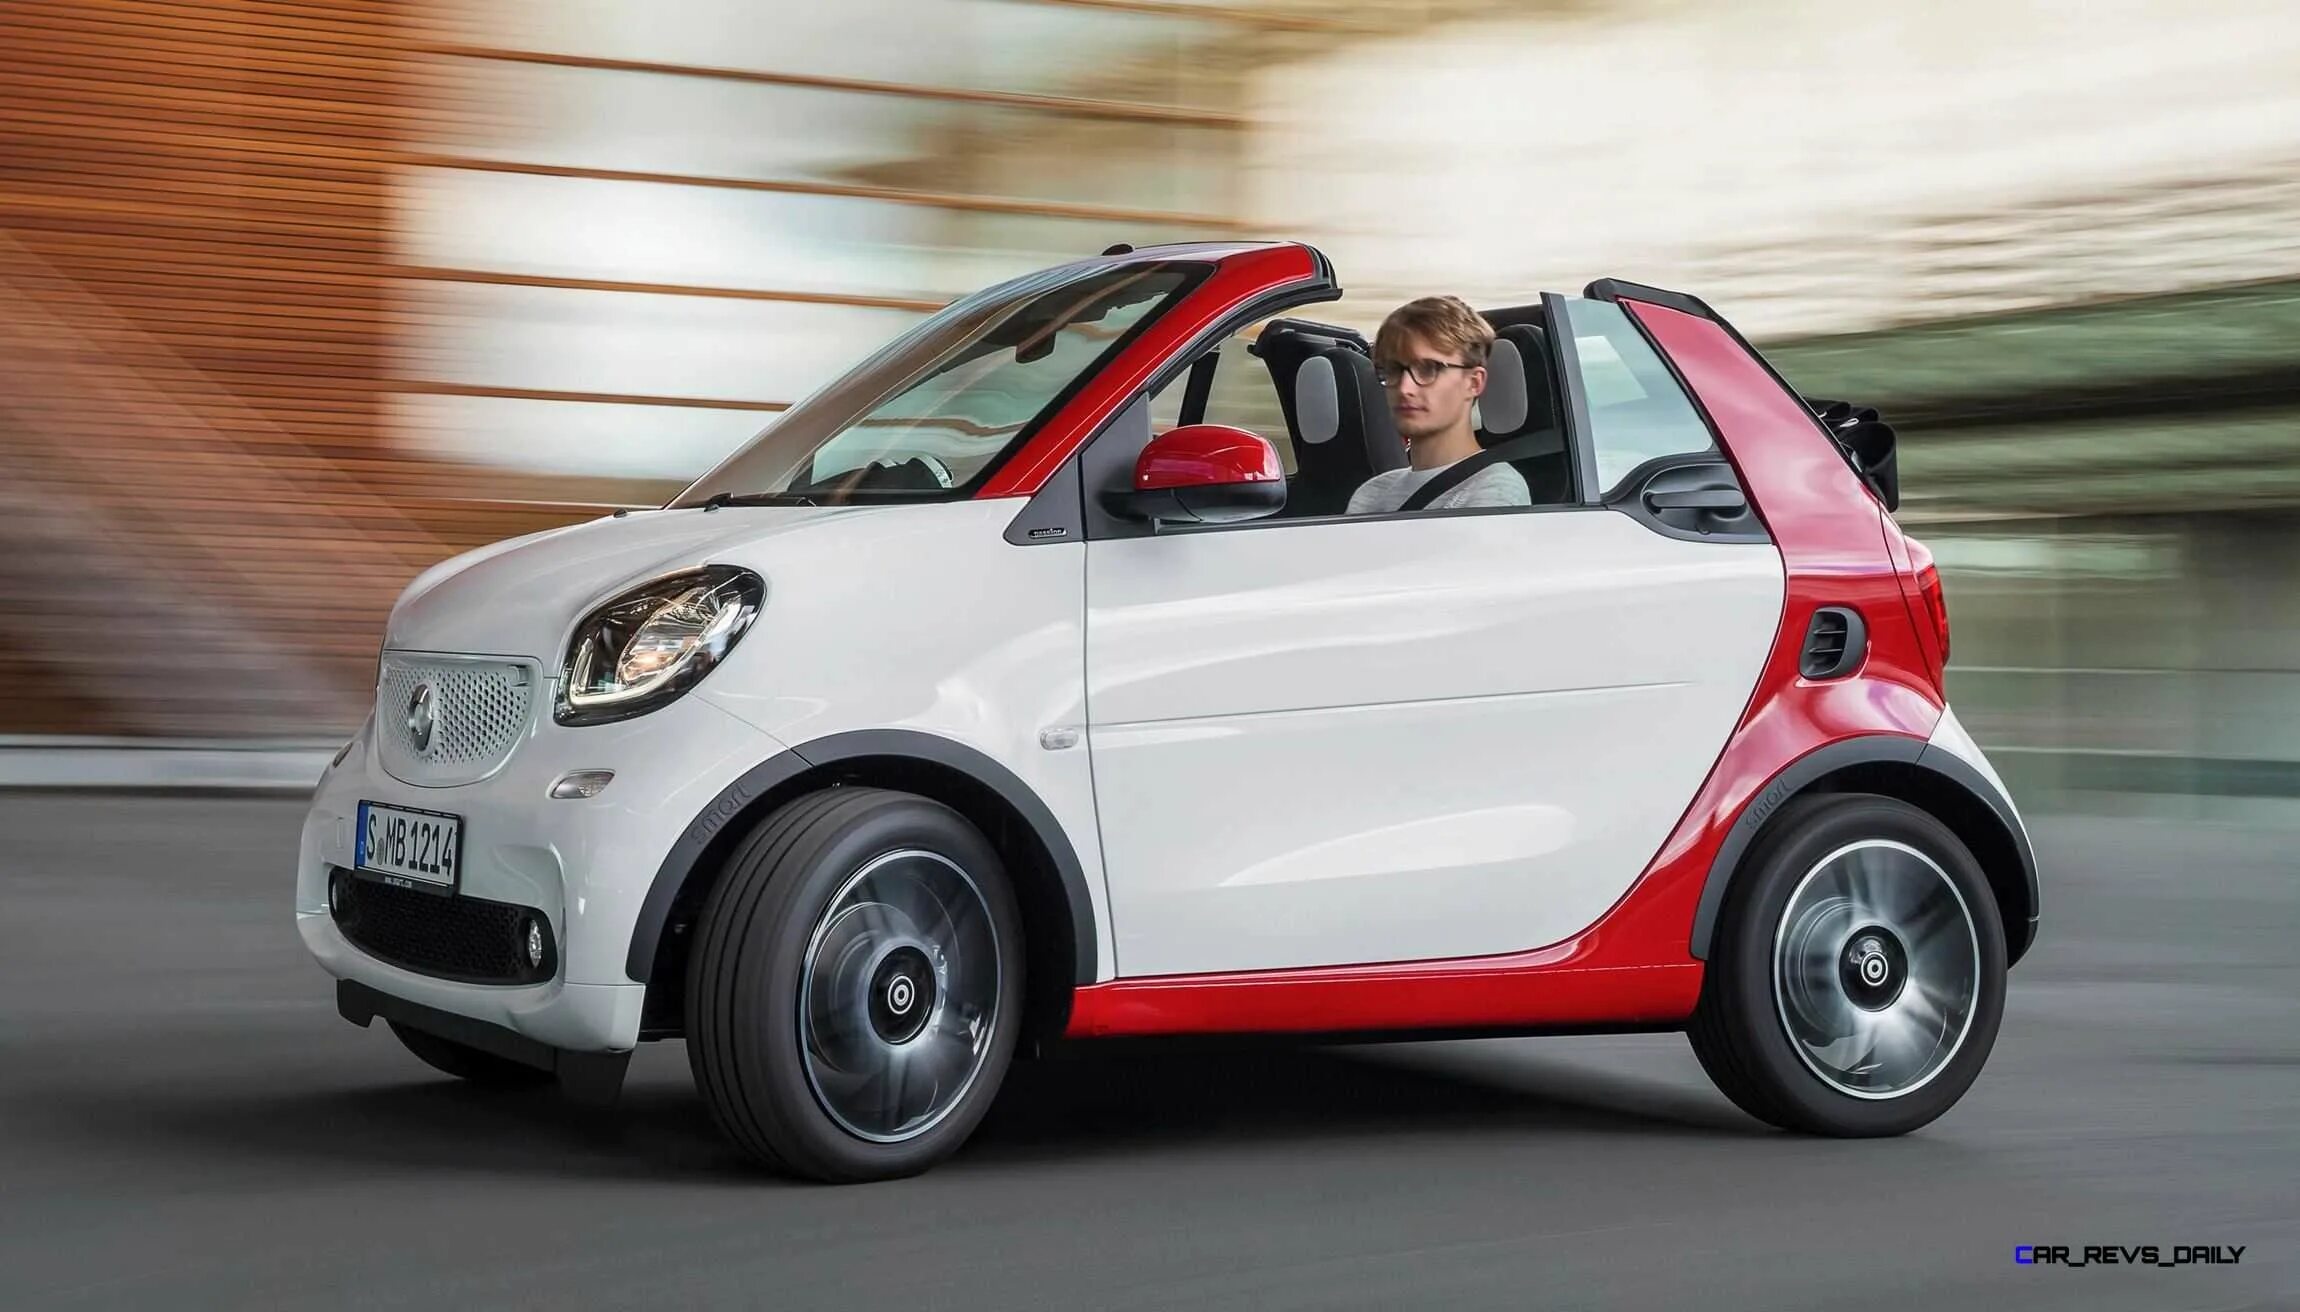 Mercedes Smart. Smart Fortwo 2017. Мерседес микро смарт. Mercedes Smart Fortwo 2015 Size.